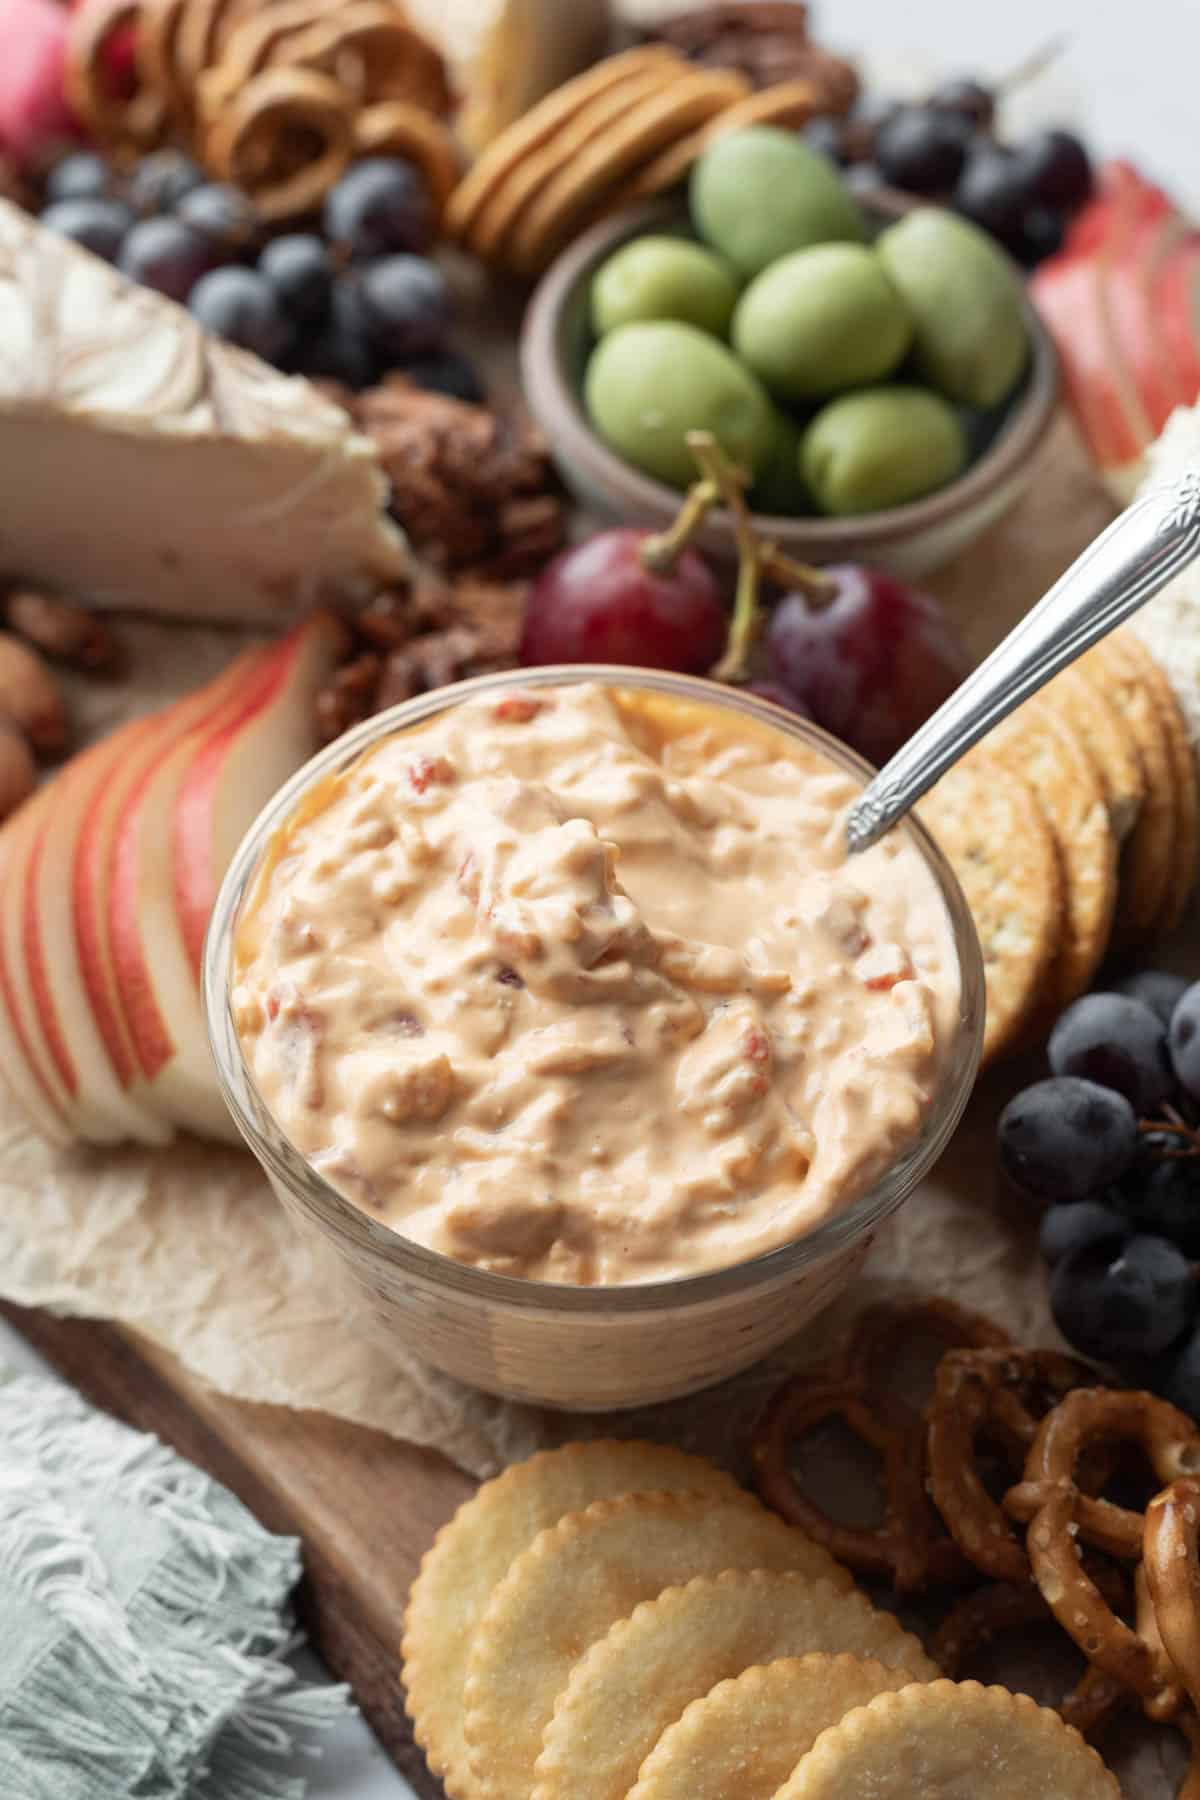 A vegan party platter with crackers, fruit, and pimento cheese dip.